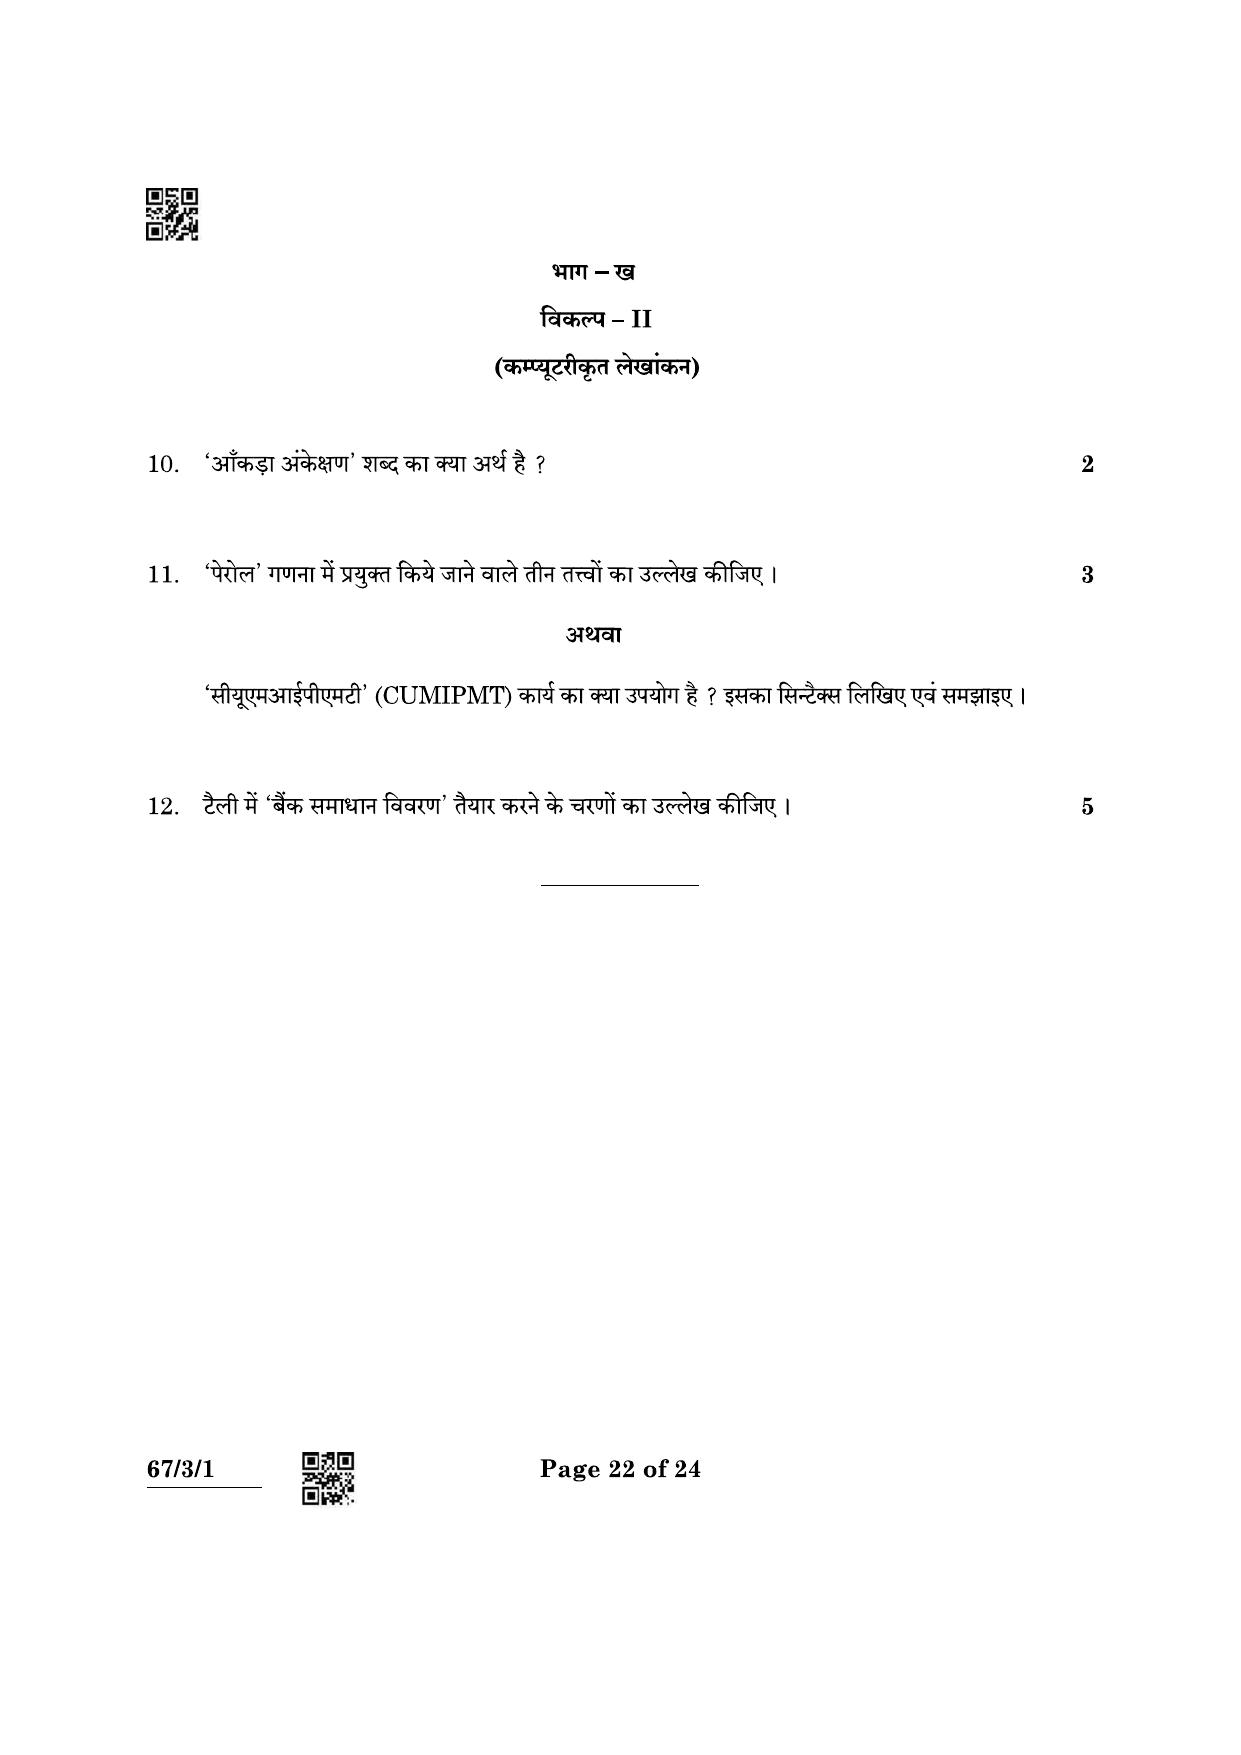 CBSE Class 12 67-3-1 Accountancy 2022 Question Paper - Page 22